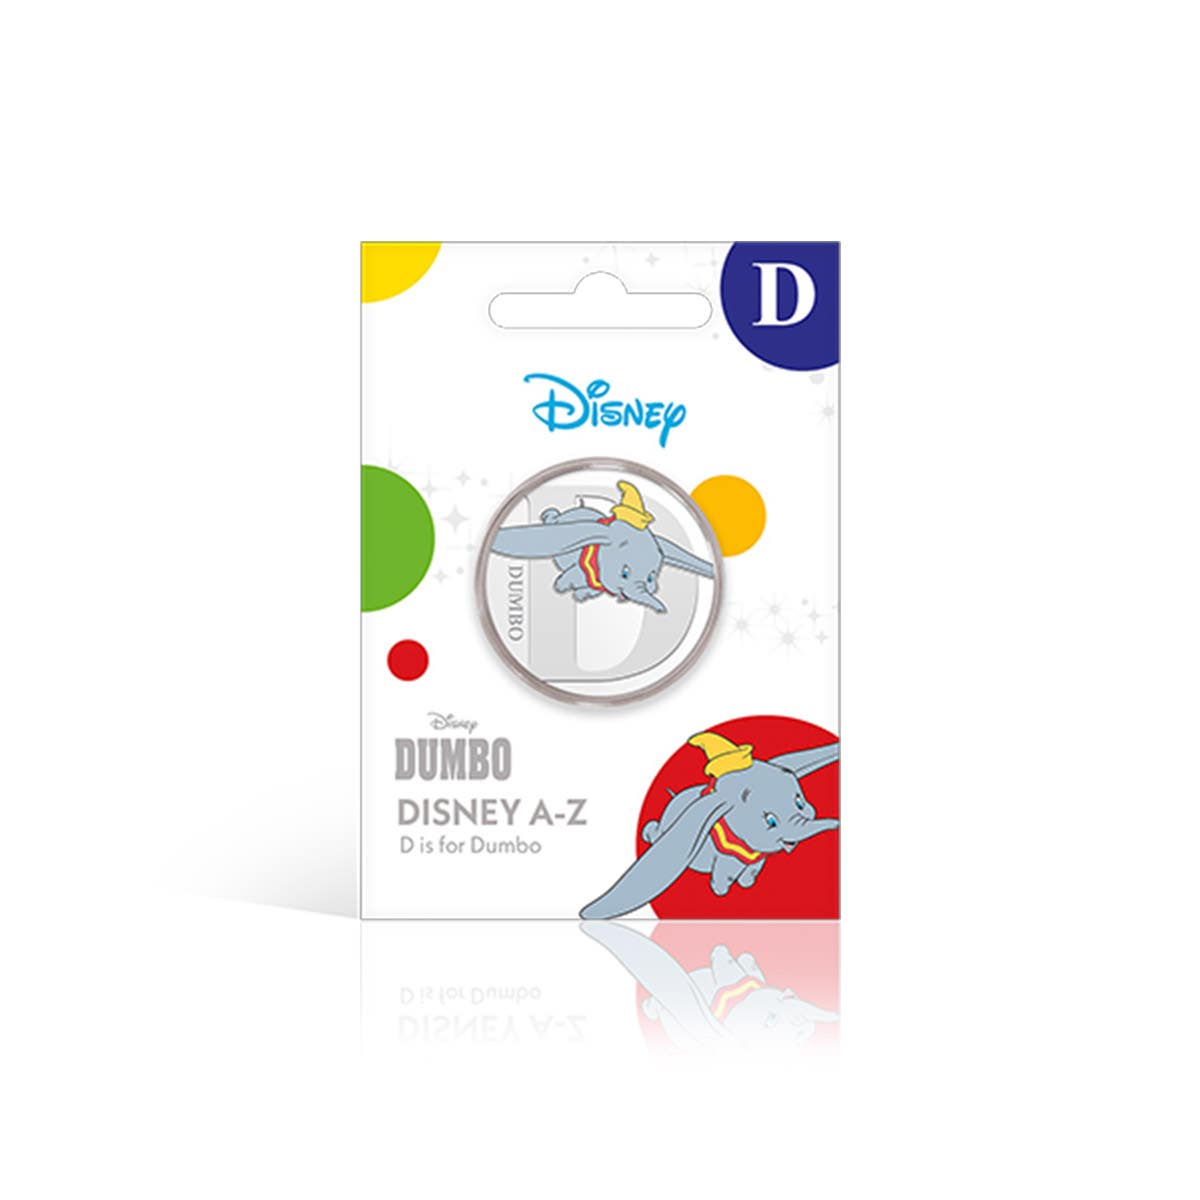 Disney D is for Dumbo Silver-Plated Commemorative